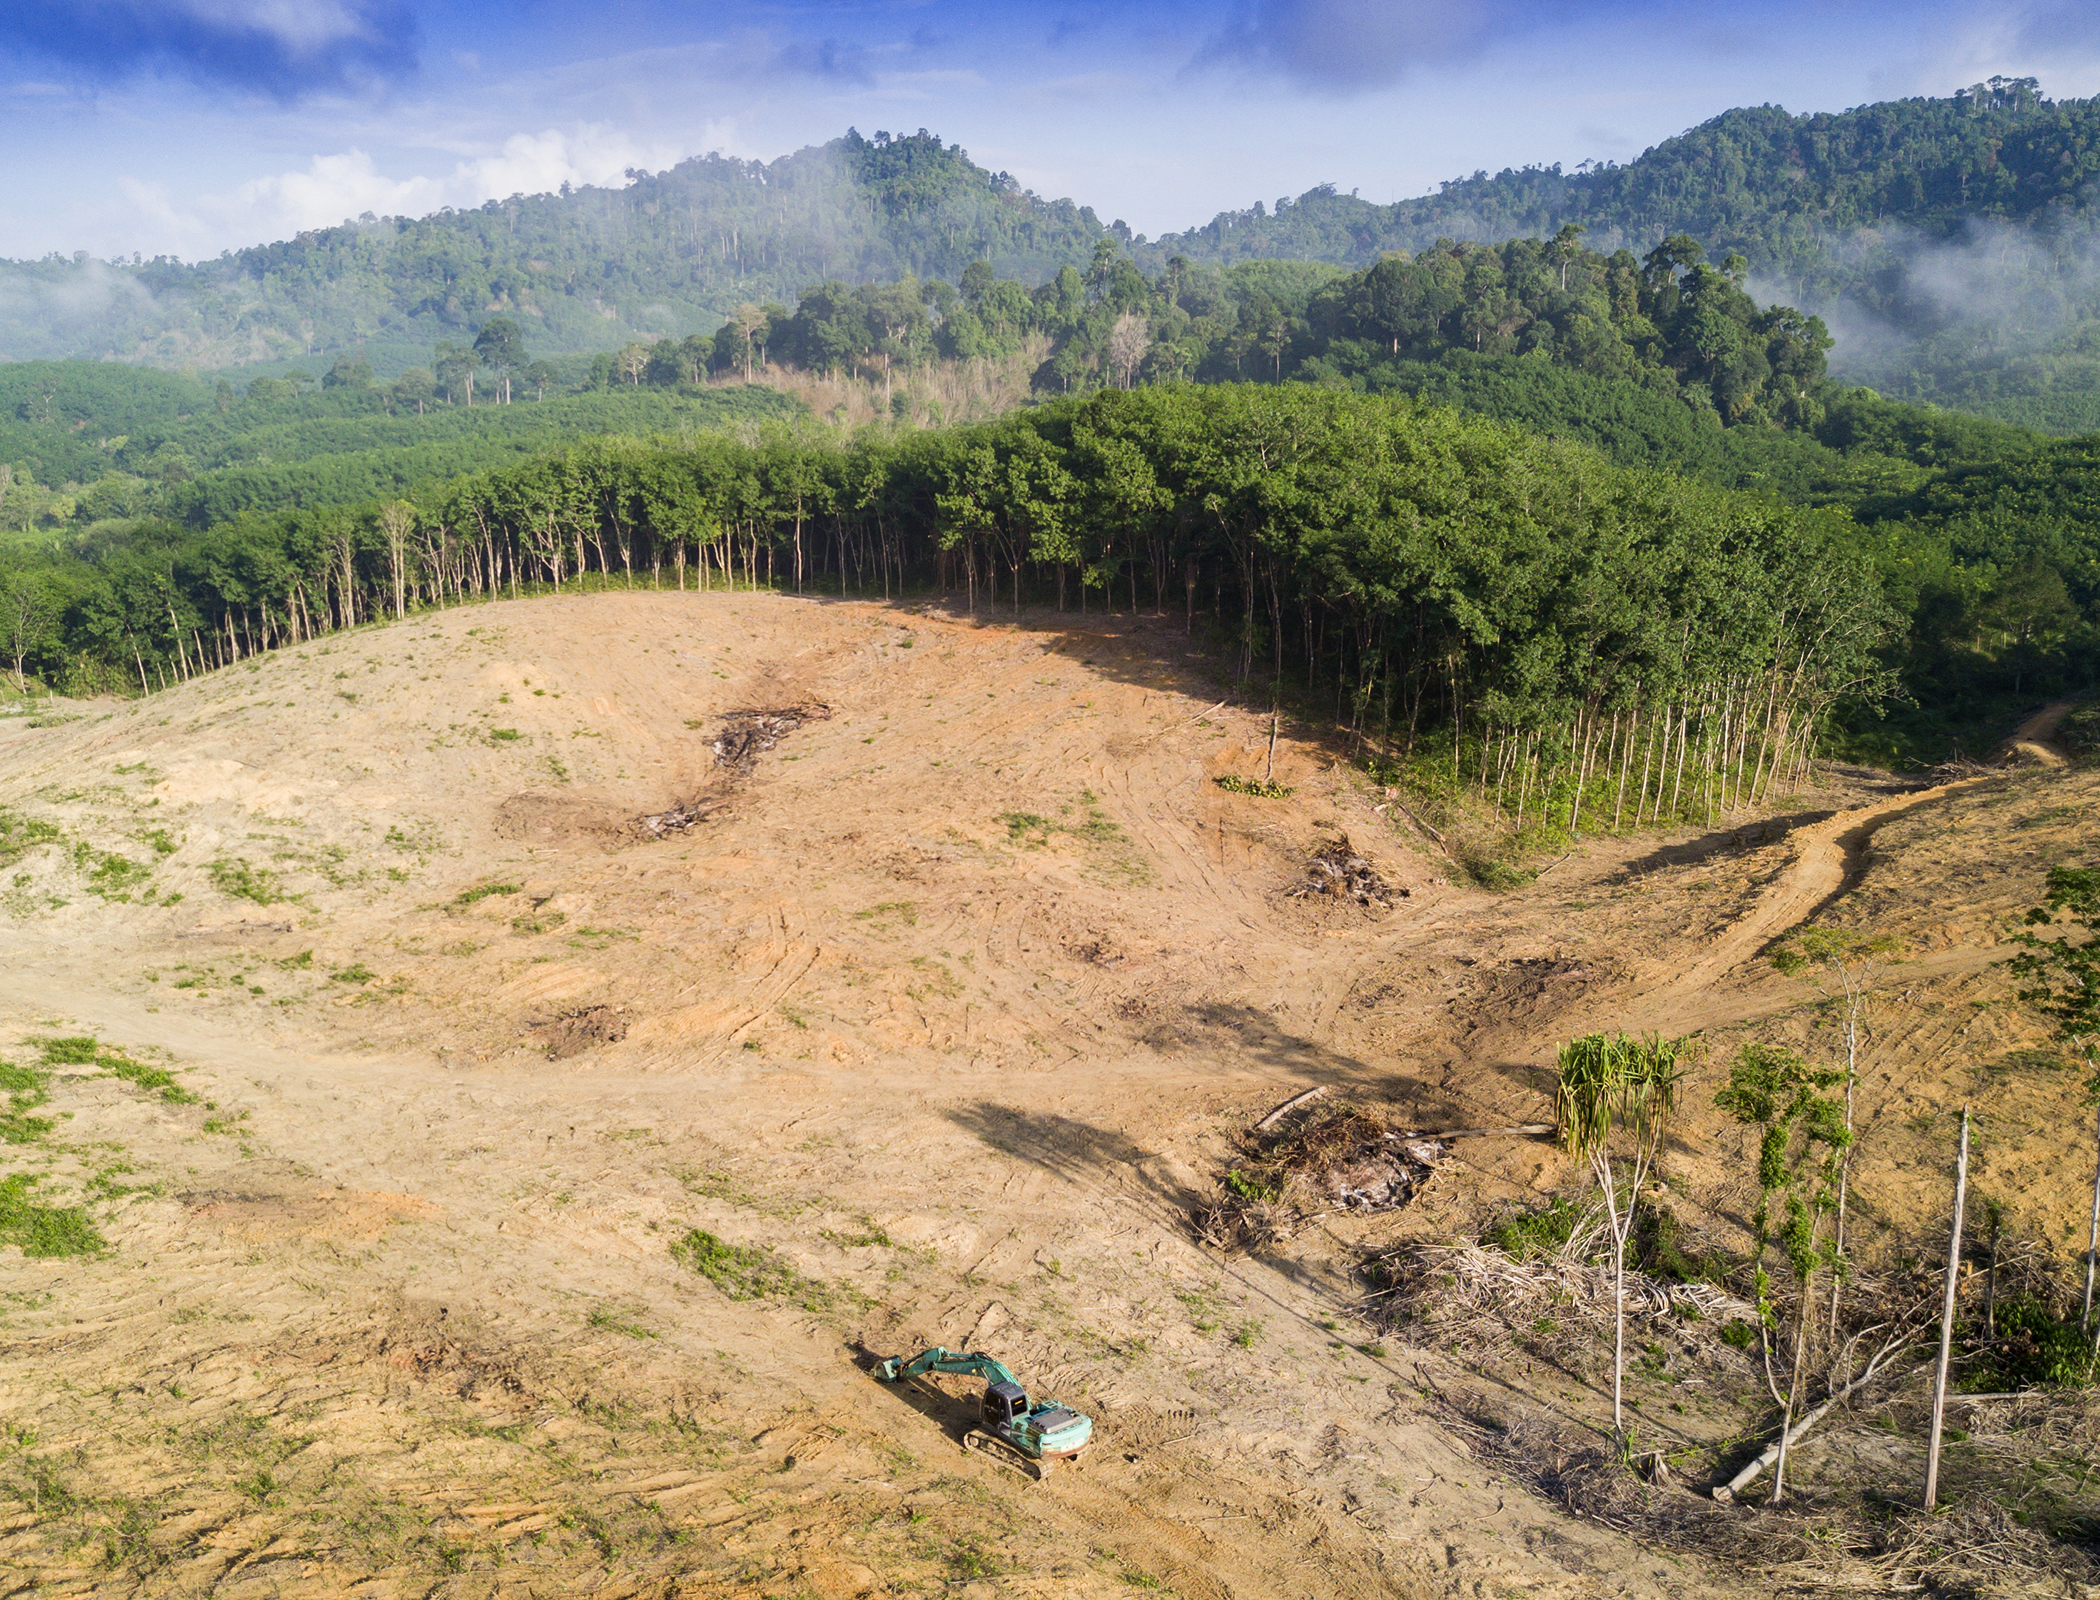 Carbon offset schemes ‘significantly’ overestimate forest preservation